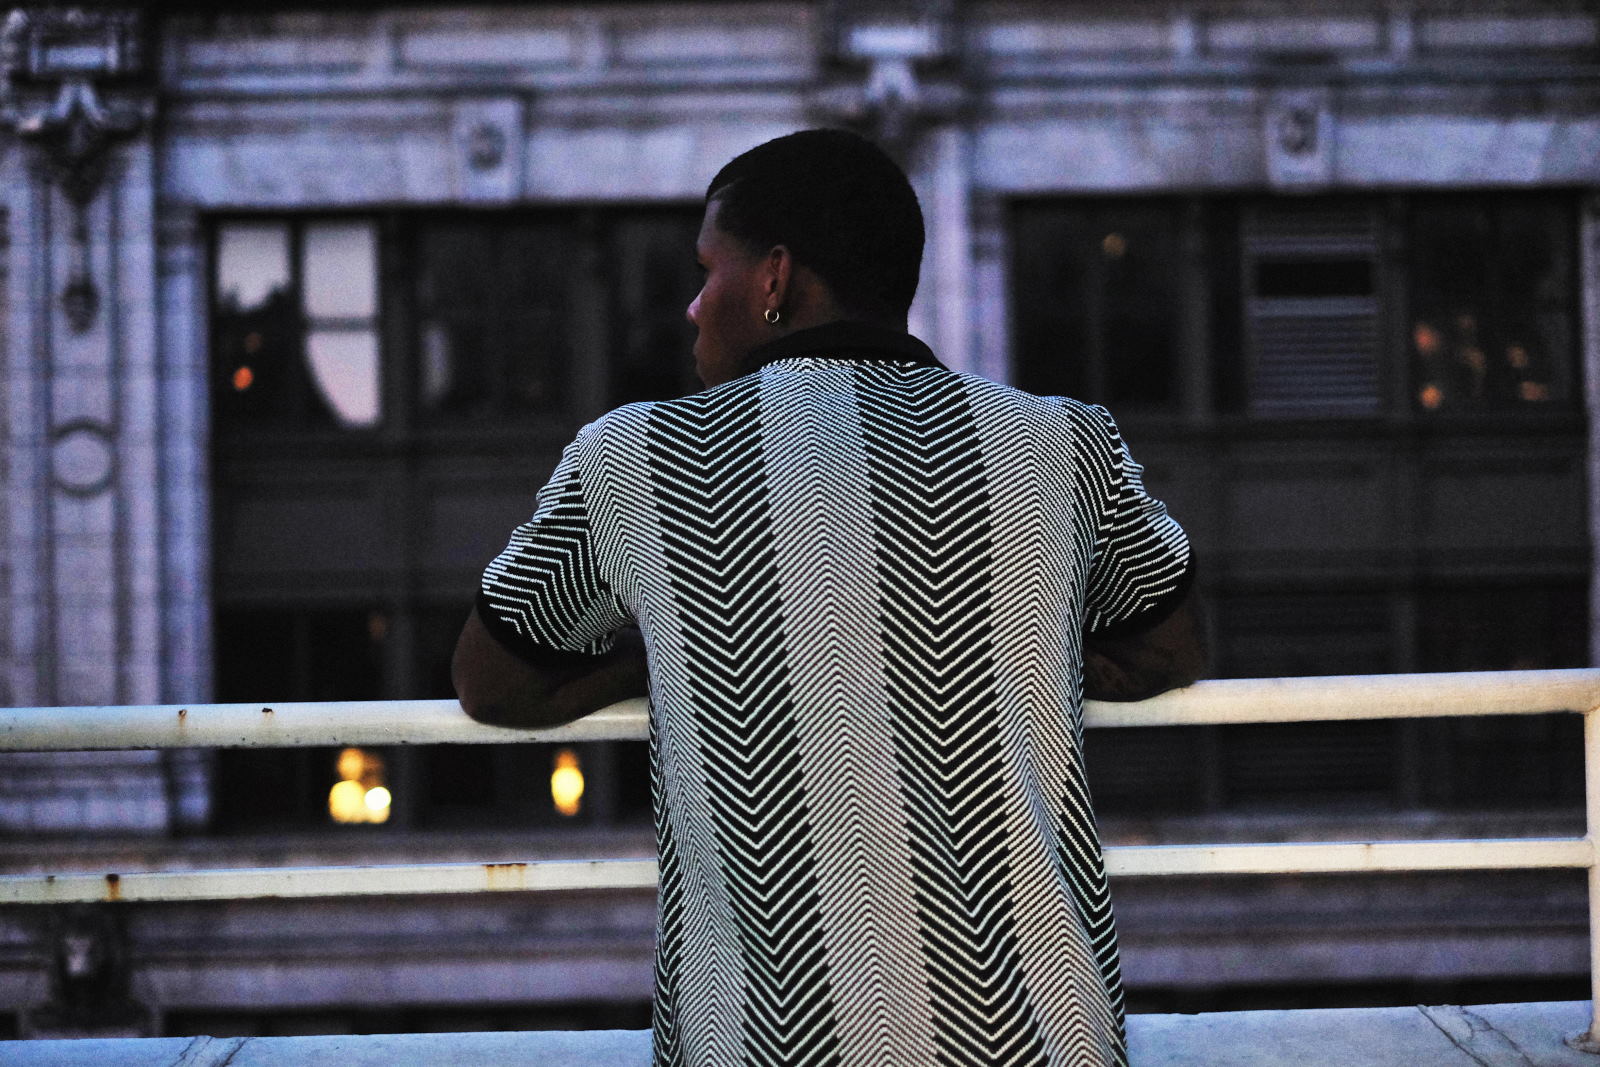 Collared herringbone vee neck tee shirt as seen from behind, twilight looking out at NYC. Menswear photographed in New York City by Kent Johnson.